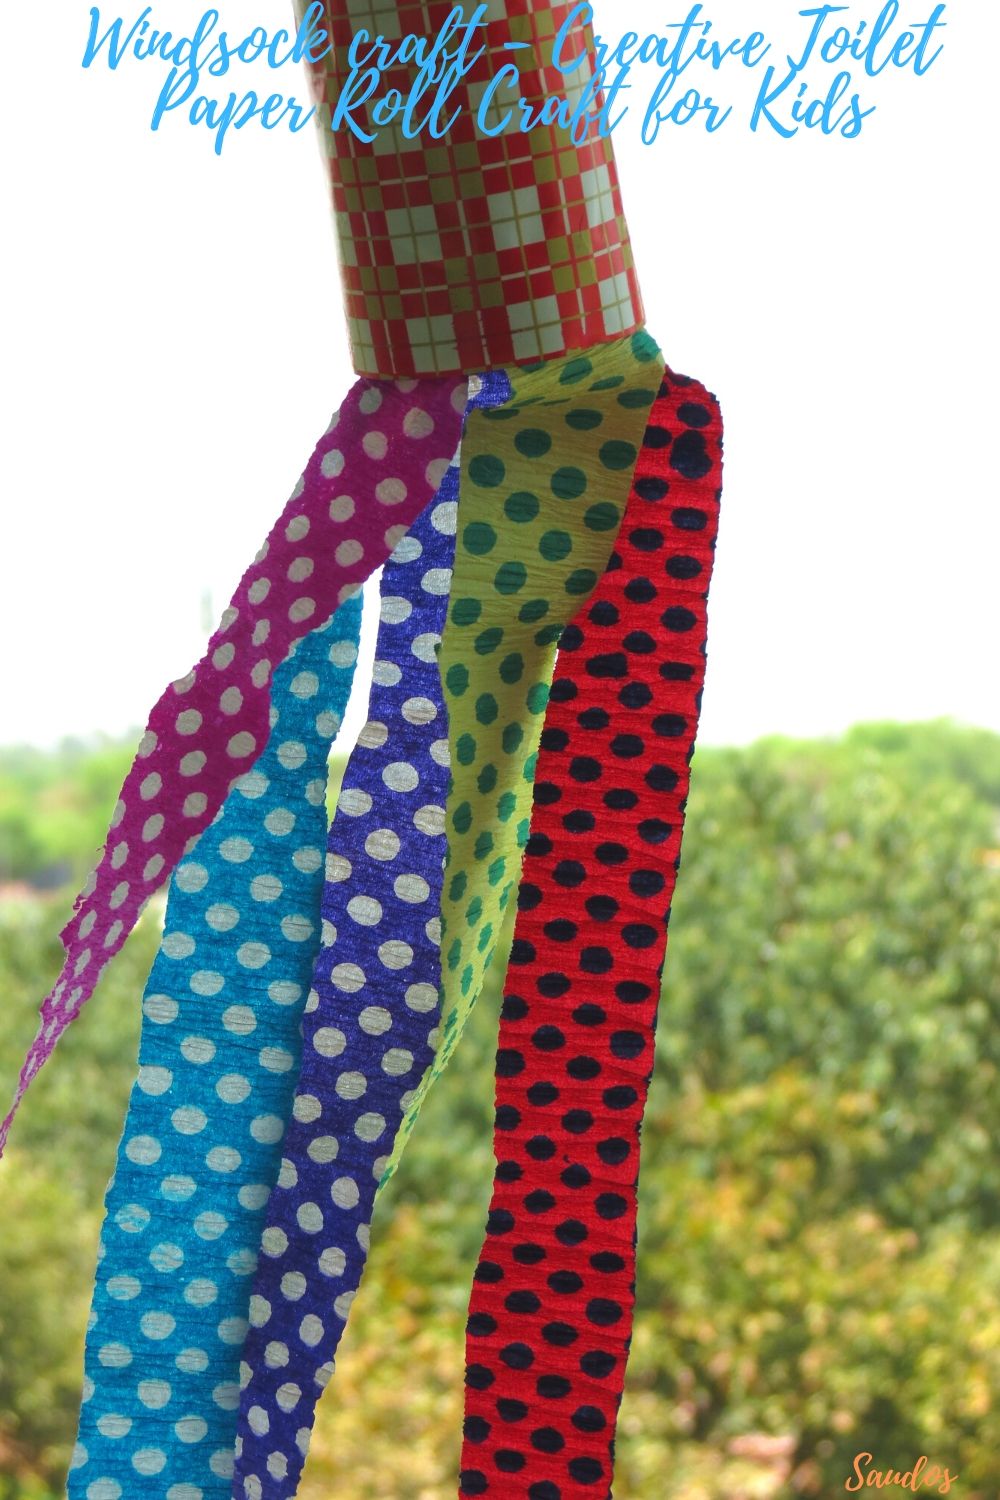 Windsock craft - Creative Toilet Paper Roll Craft for Kids